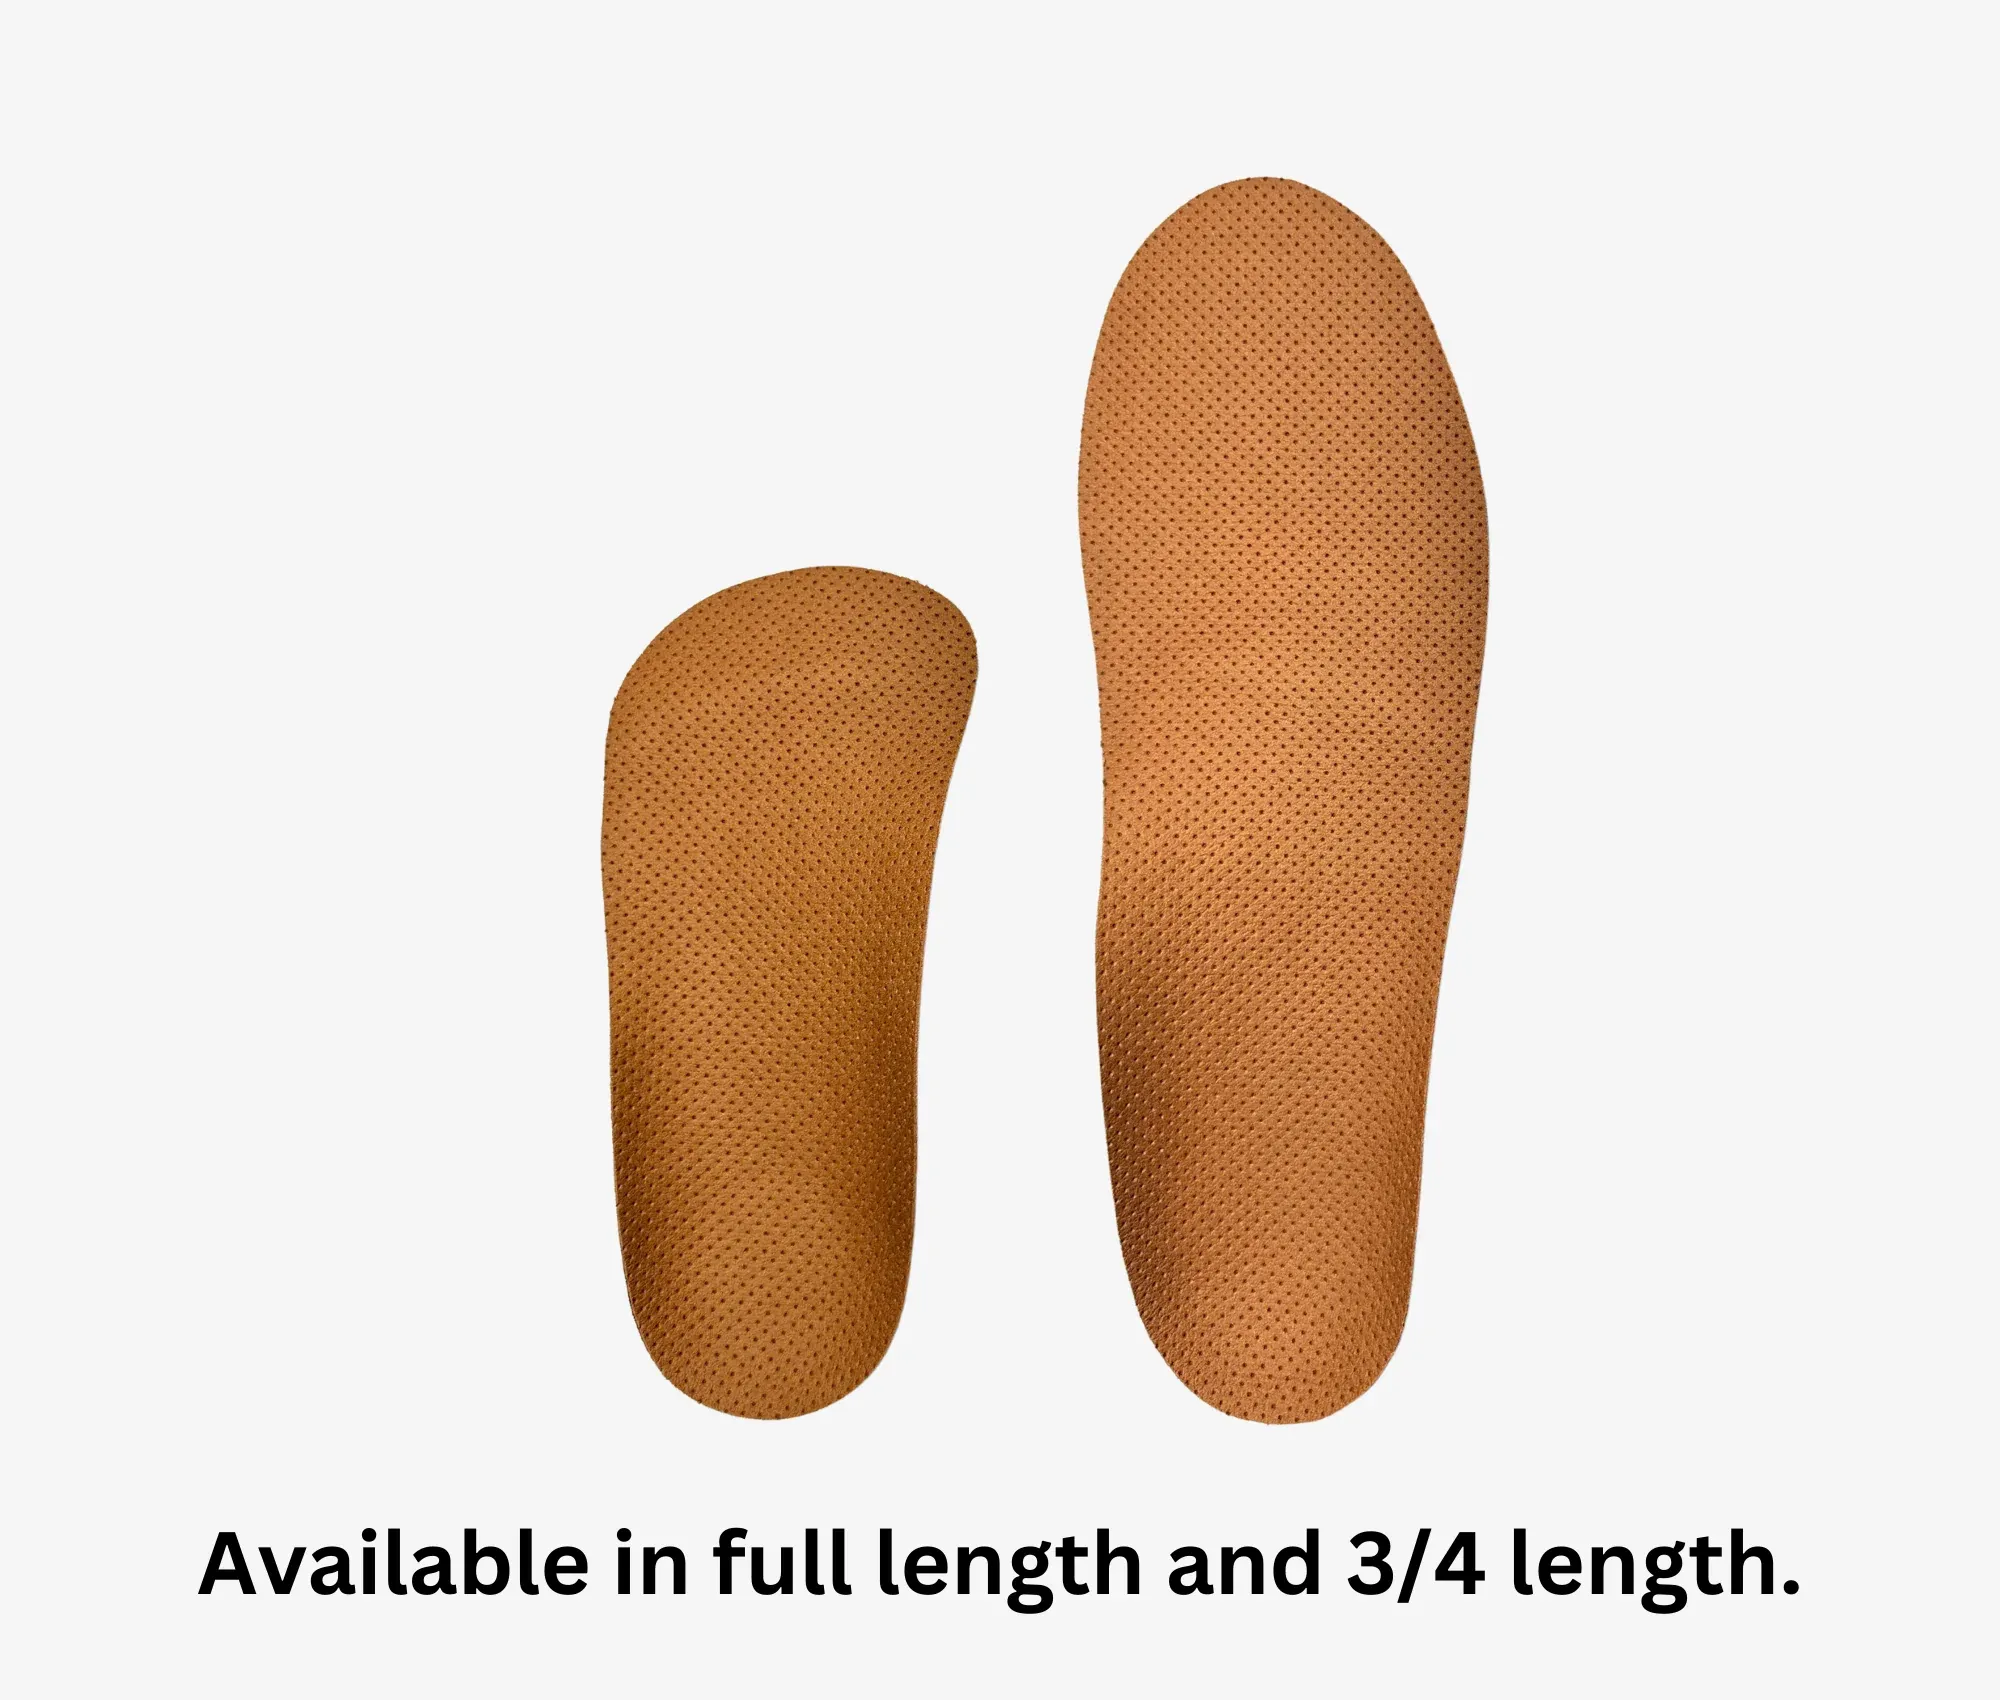 a pair of feet with the words available in full length and 3 / 4 length